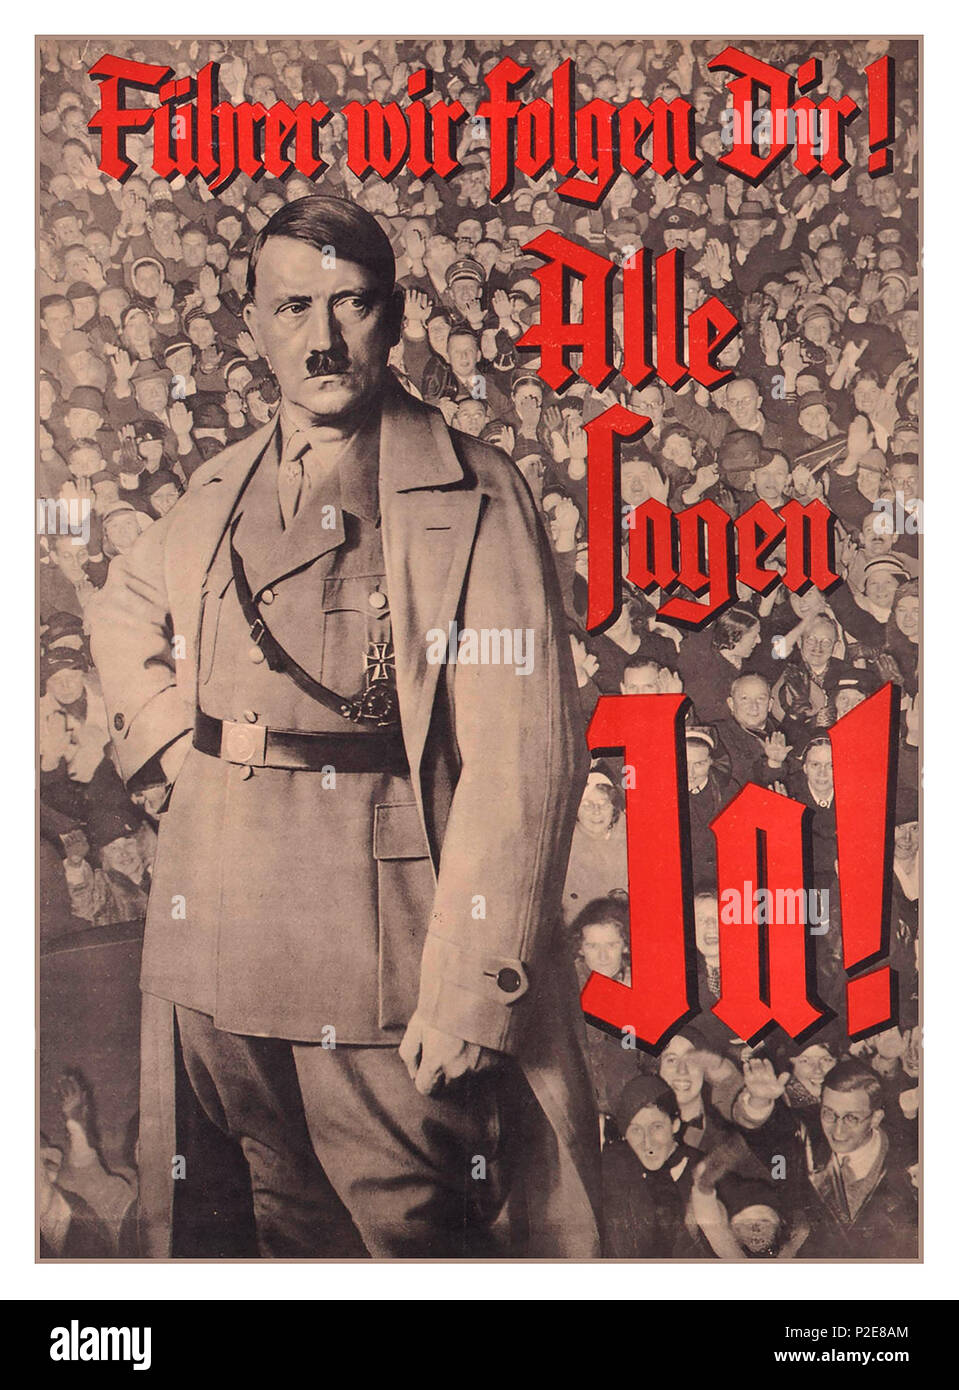 1934 Vintage Adolf Hitler Nazi NSDAP political election Poster 'Leader we follow you!  Everyone says yes!' Nazi propaganda poster on the union of the offices of Chancellor and President Published by Reich Propaganda Directorate of the NSDAP Germany, 1934 Stock Photo